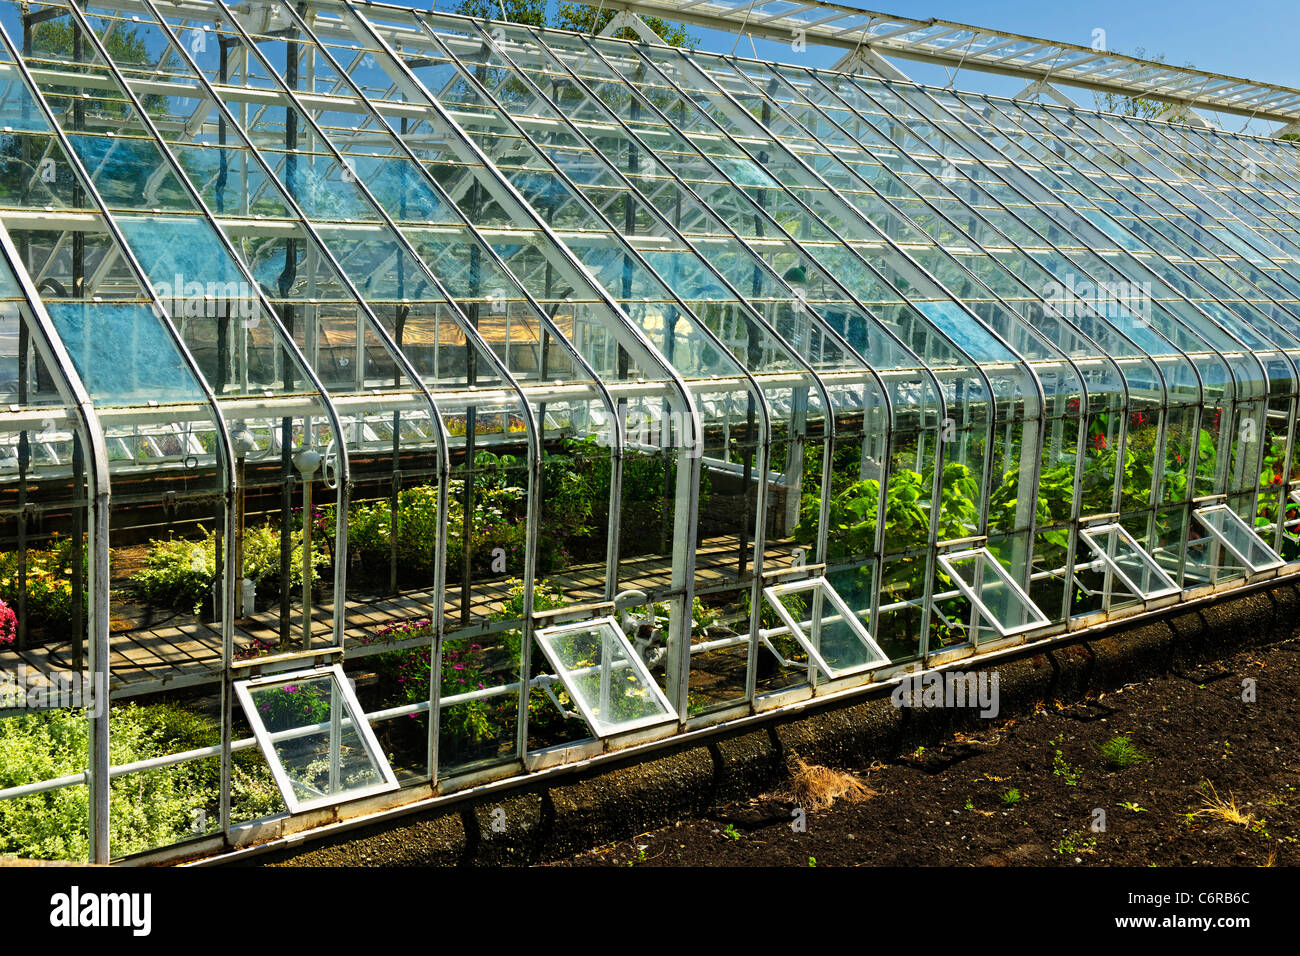 Large glass greenhouse or hothouse building exterior with plants Stock Photo